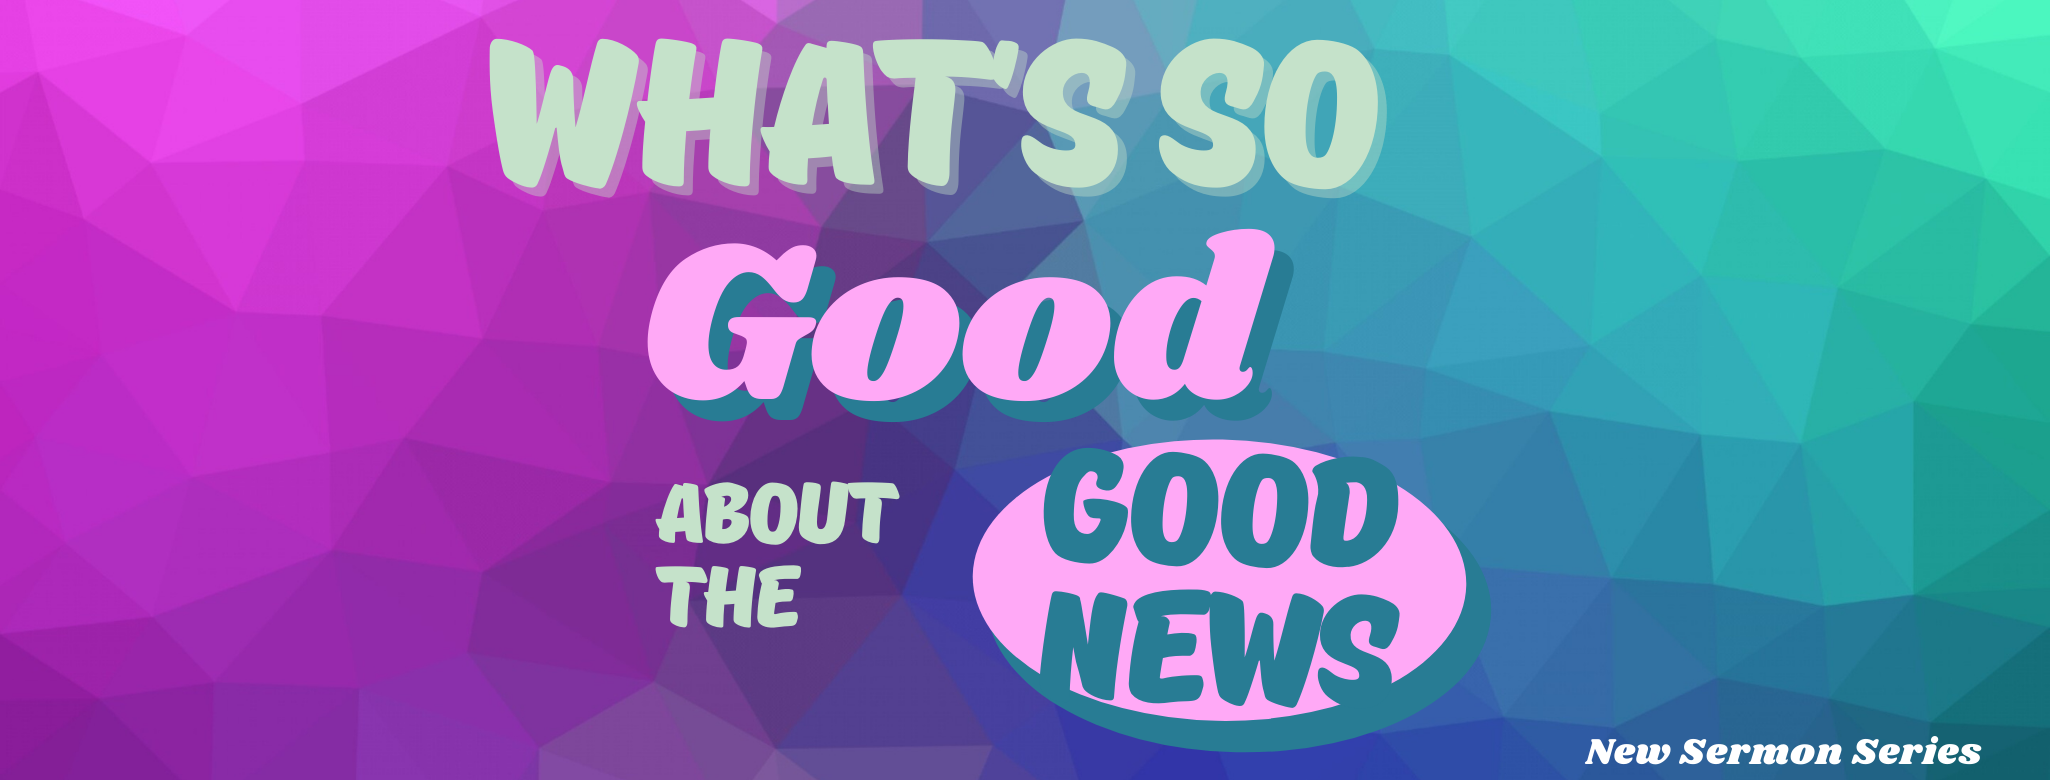 What’s So Good about the Good News? “Knowing What to Do”